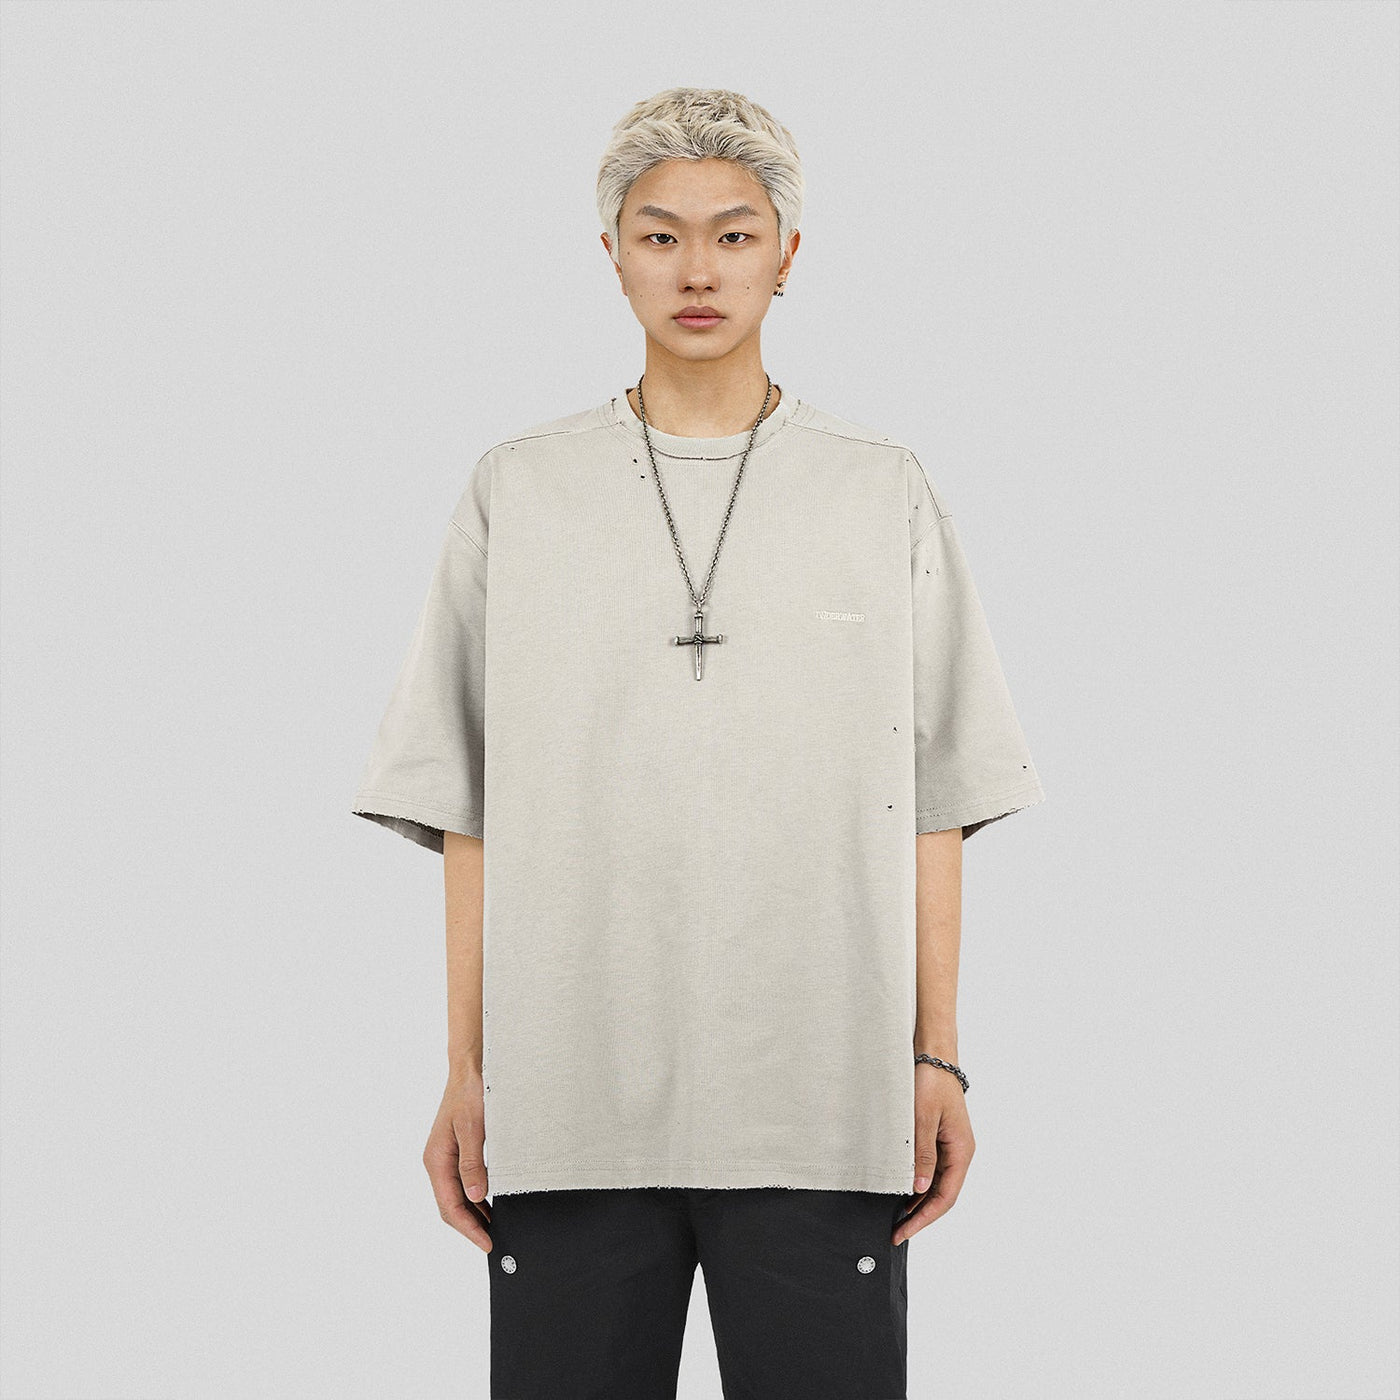 Solid Distressed Hole T-Shirt Korean Street Fashion T-Shirt By Underwater Shop Online at OH Vault